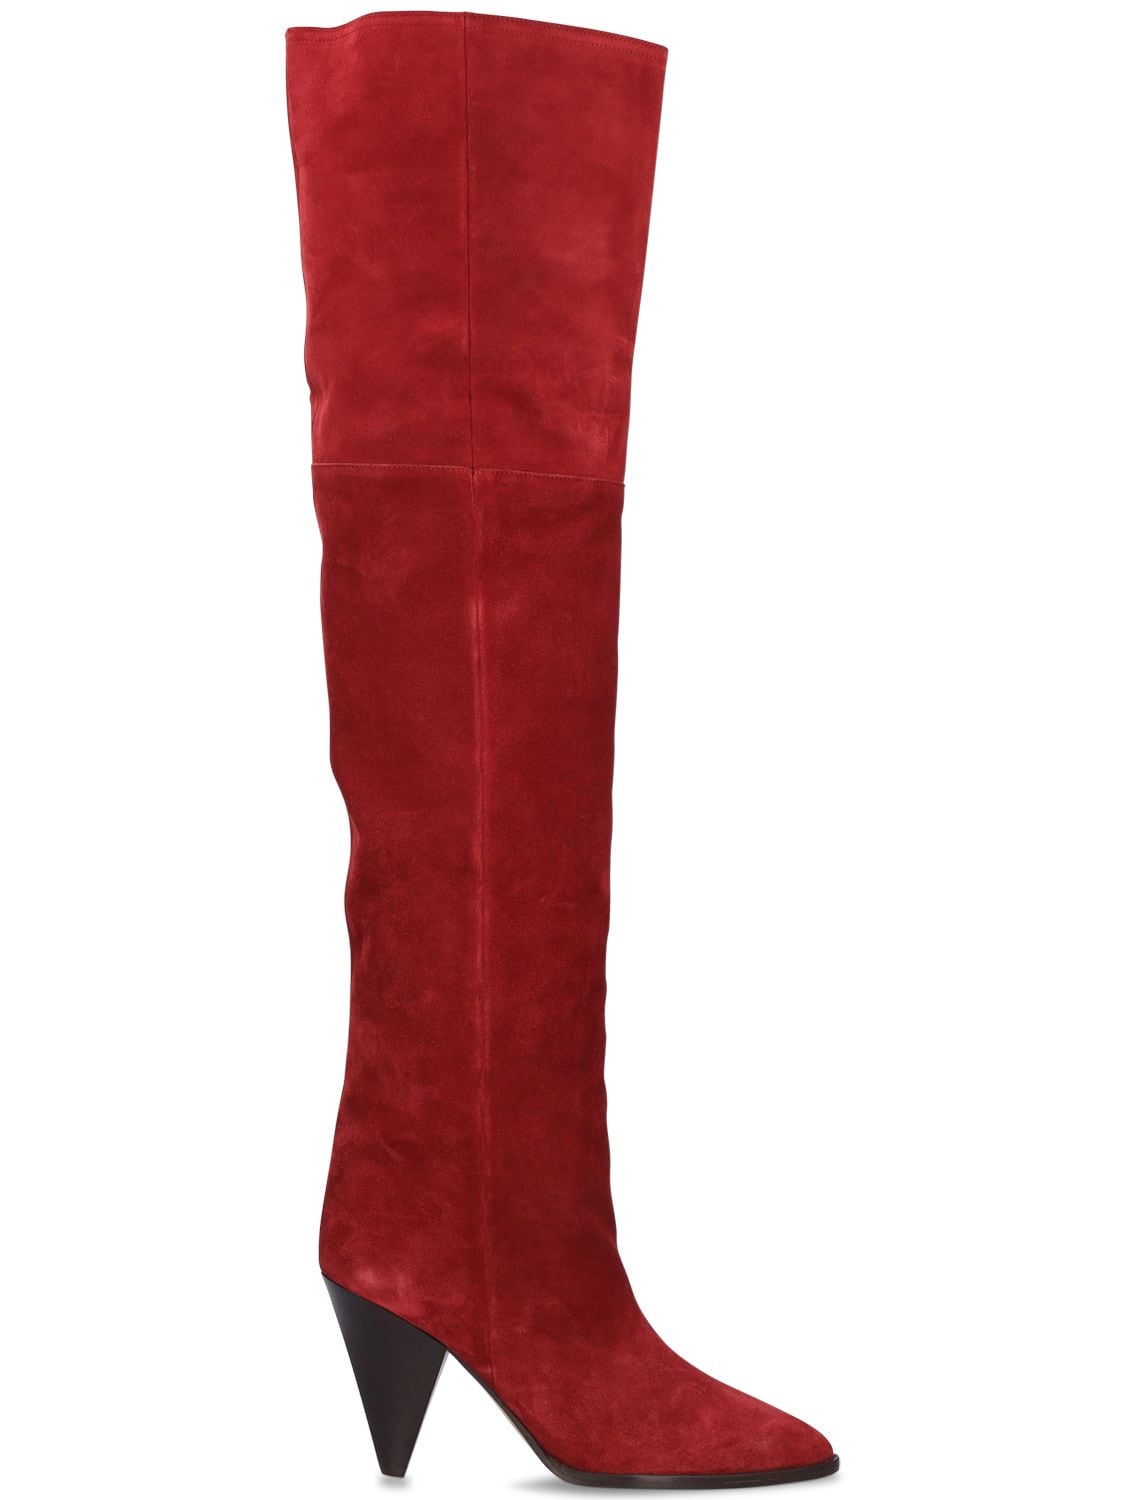 ISABEL MARANT 90mm Riria Suede Over-the-knee Boots